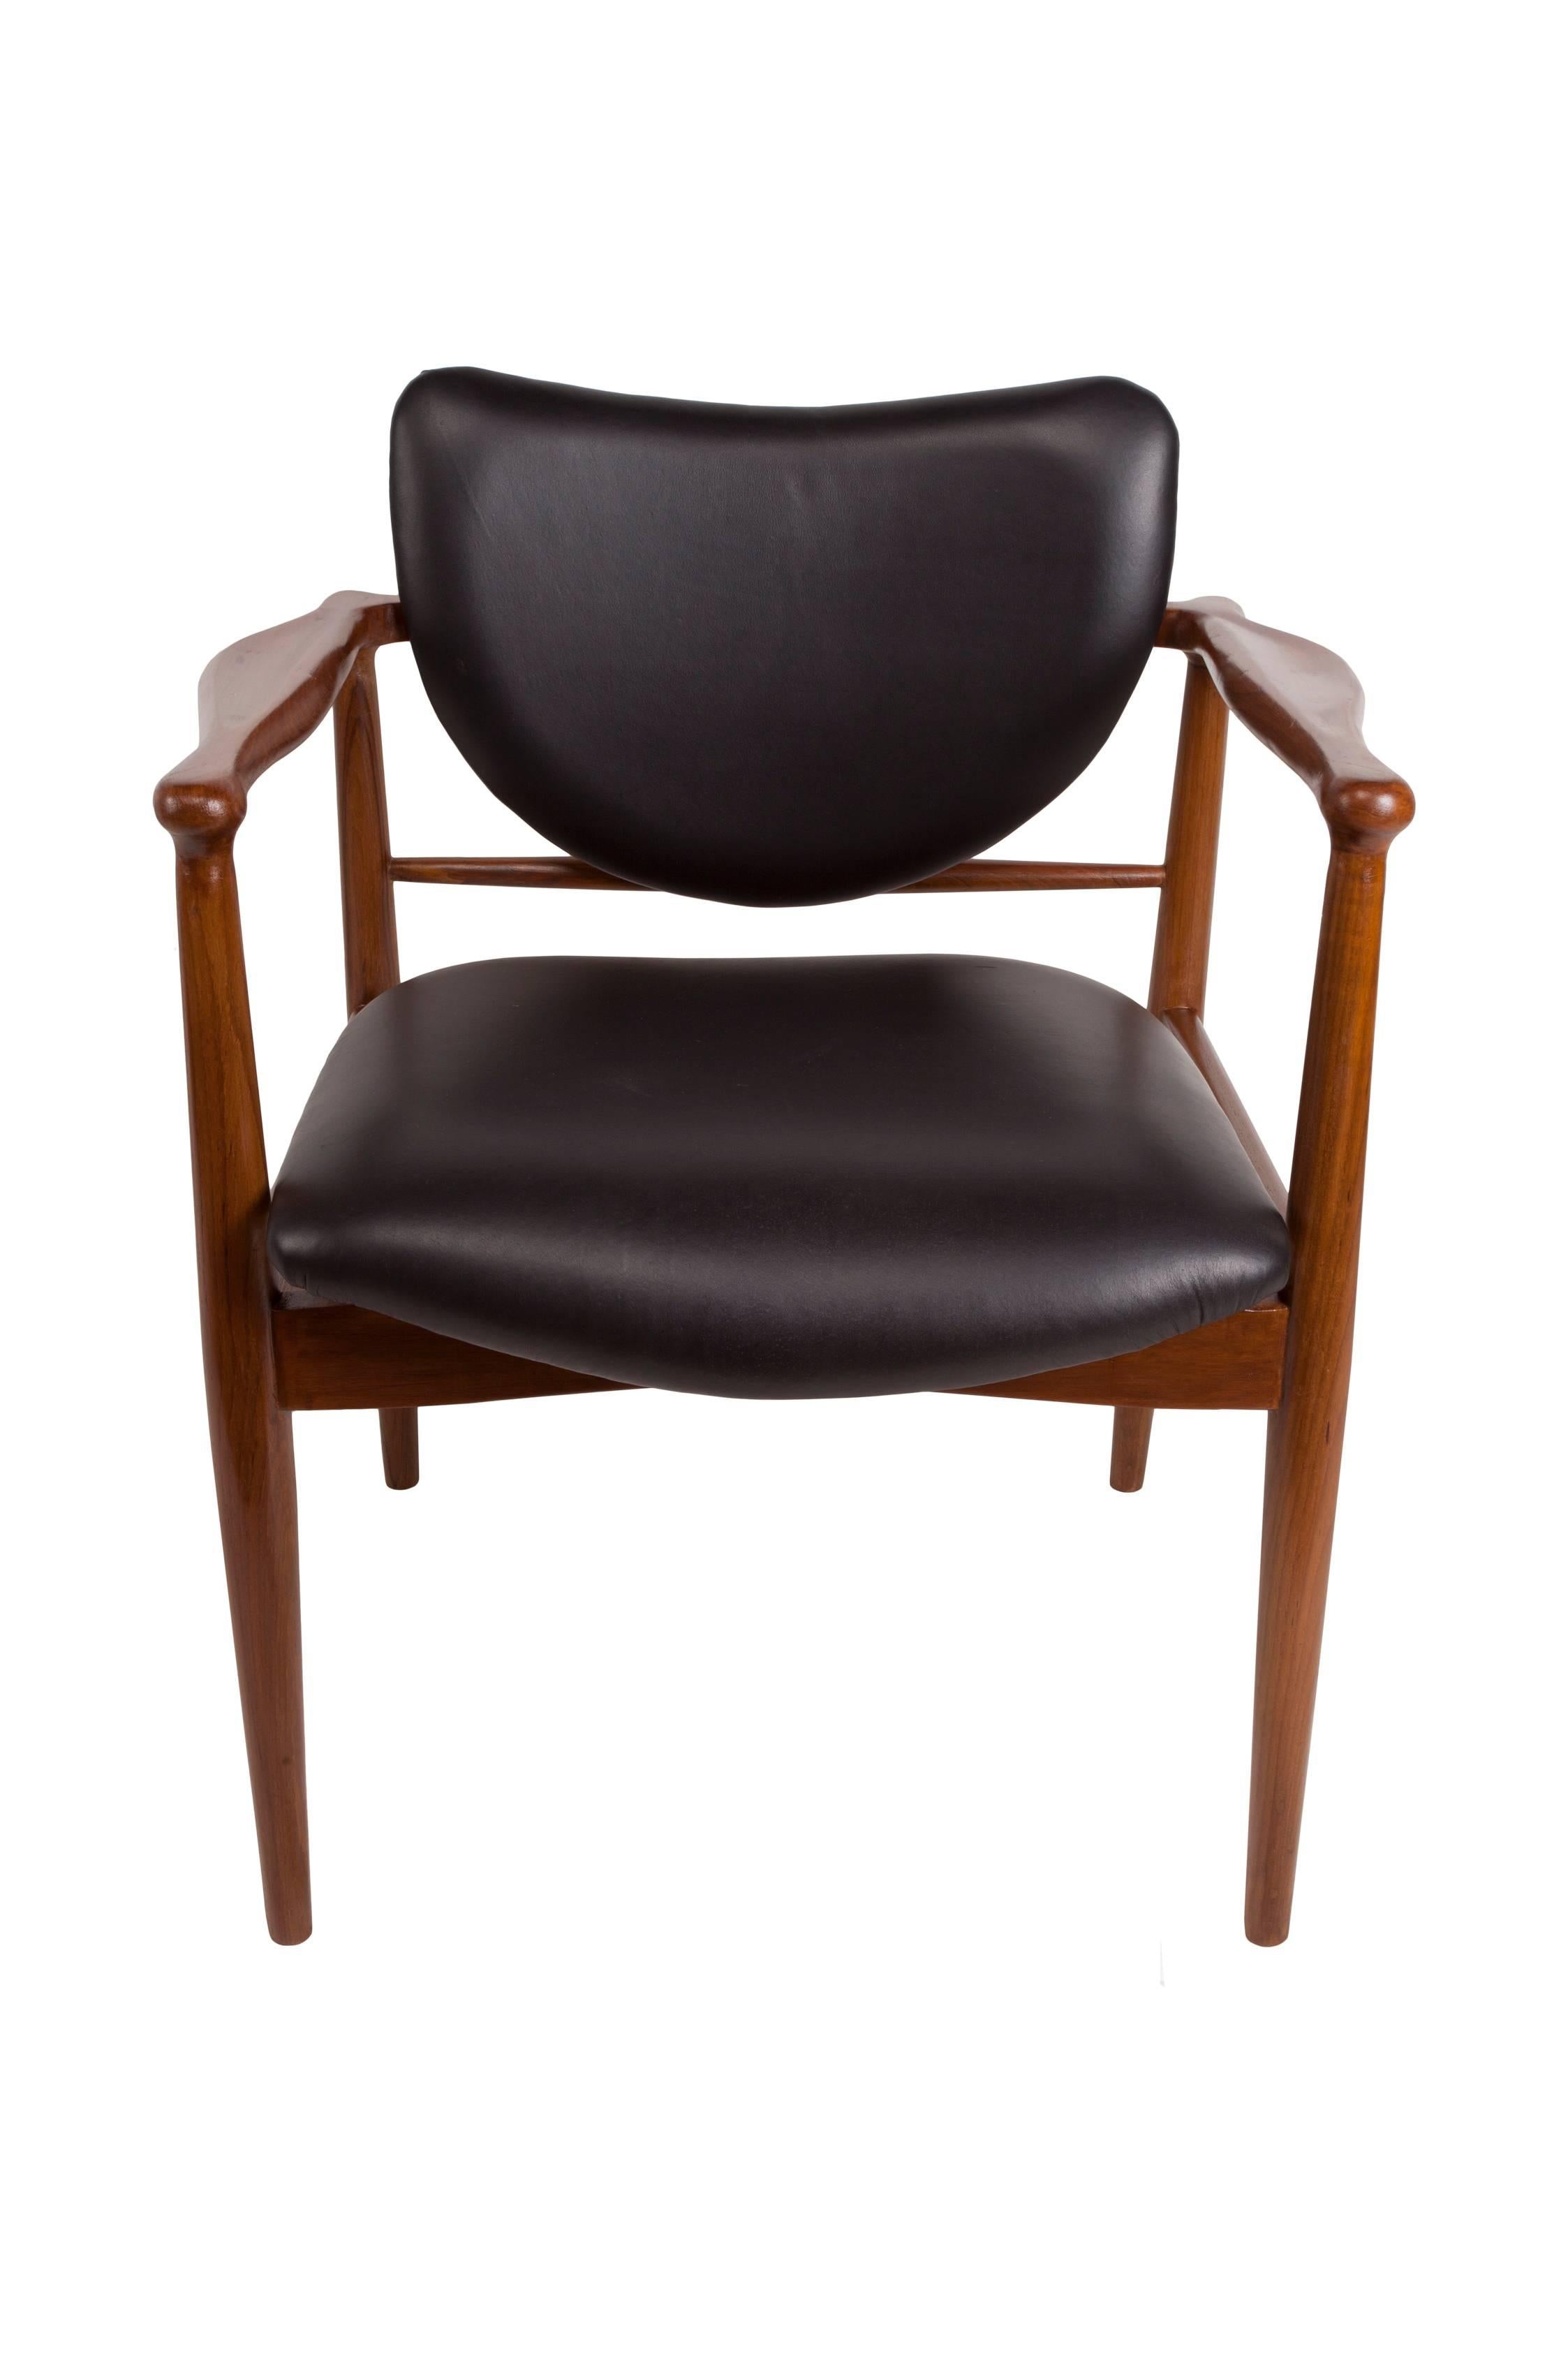 Fabulous Danish Mid-Century Modern teak and black leather chair attributed to Finn Juhl for Baker. Great design and style, refinished and very comfortable. Leather upholstery redone. Great style, great lines.  Makes a great desk chair too.

 